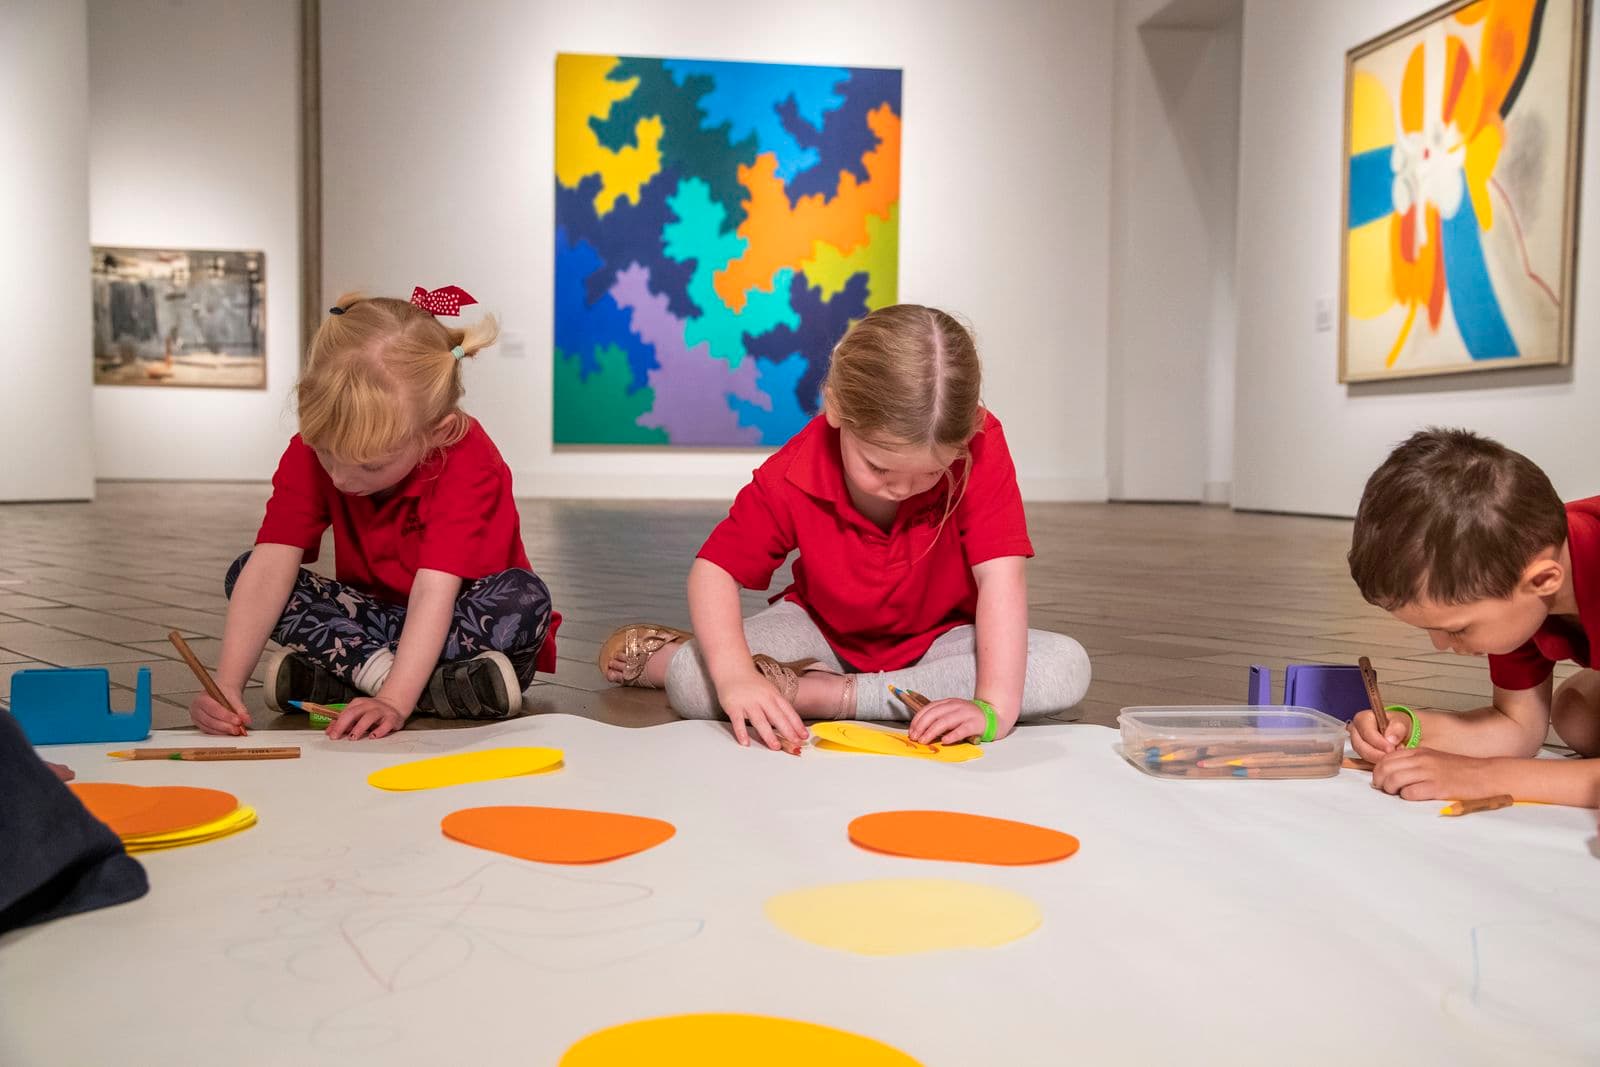 A group of primary school children sit on the gallery floor and work together on an artwork